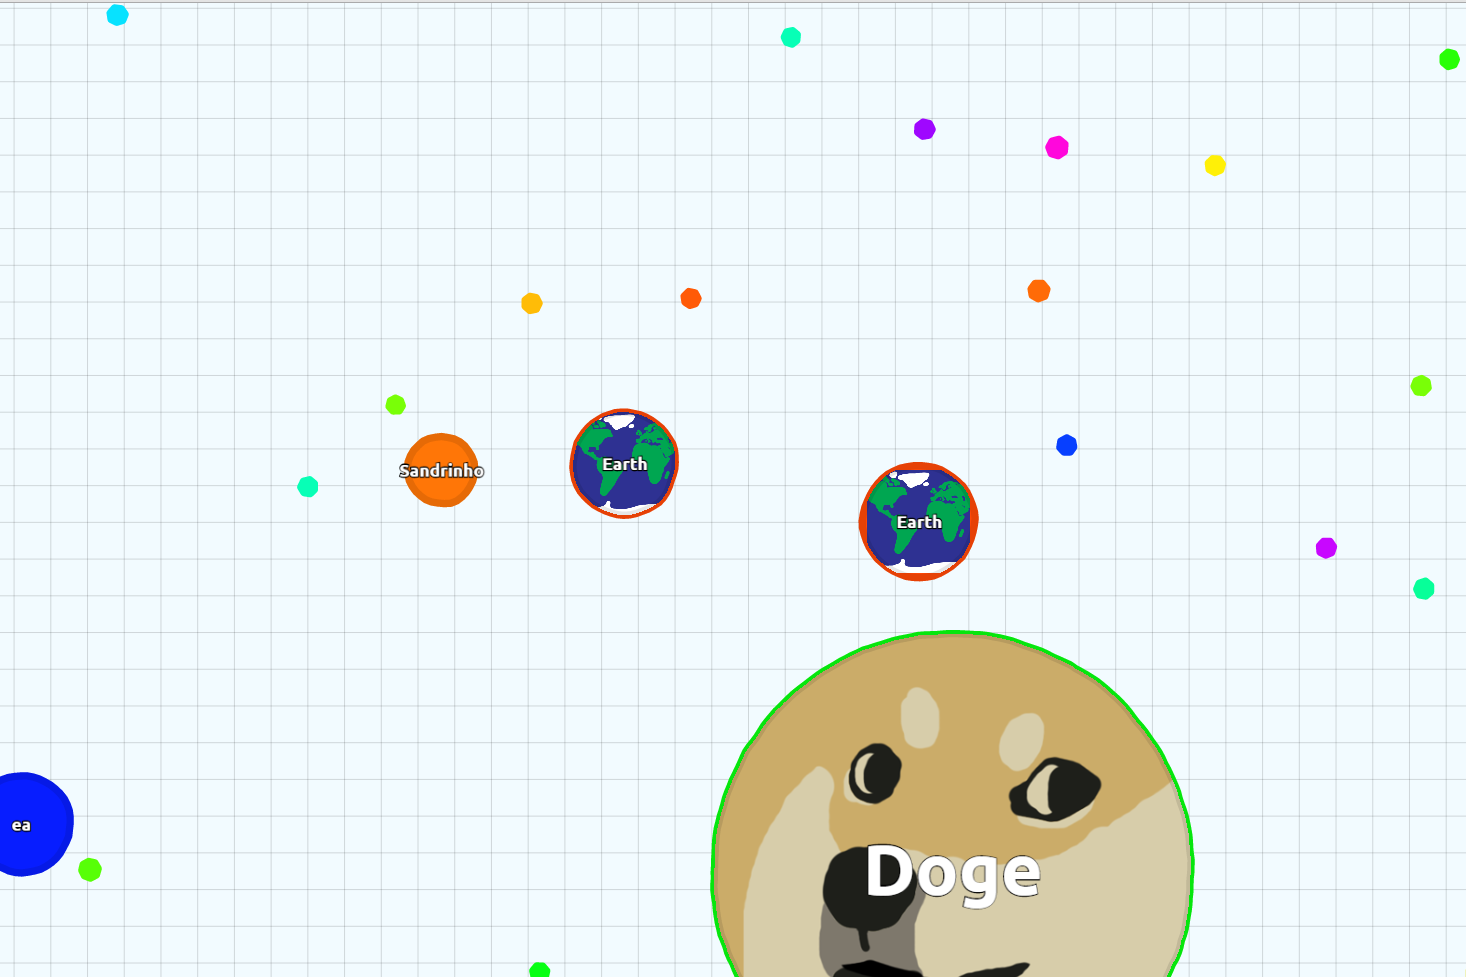 Agar.io Mobile - DONT TOUCH MY MASS 